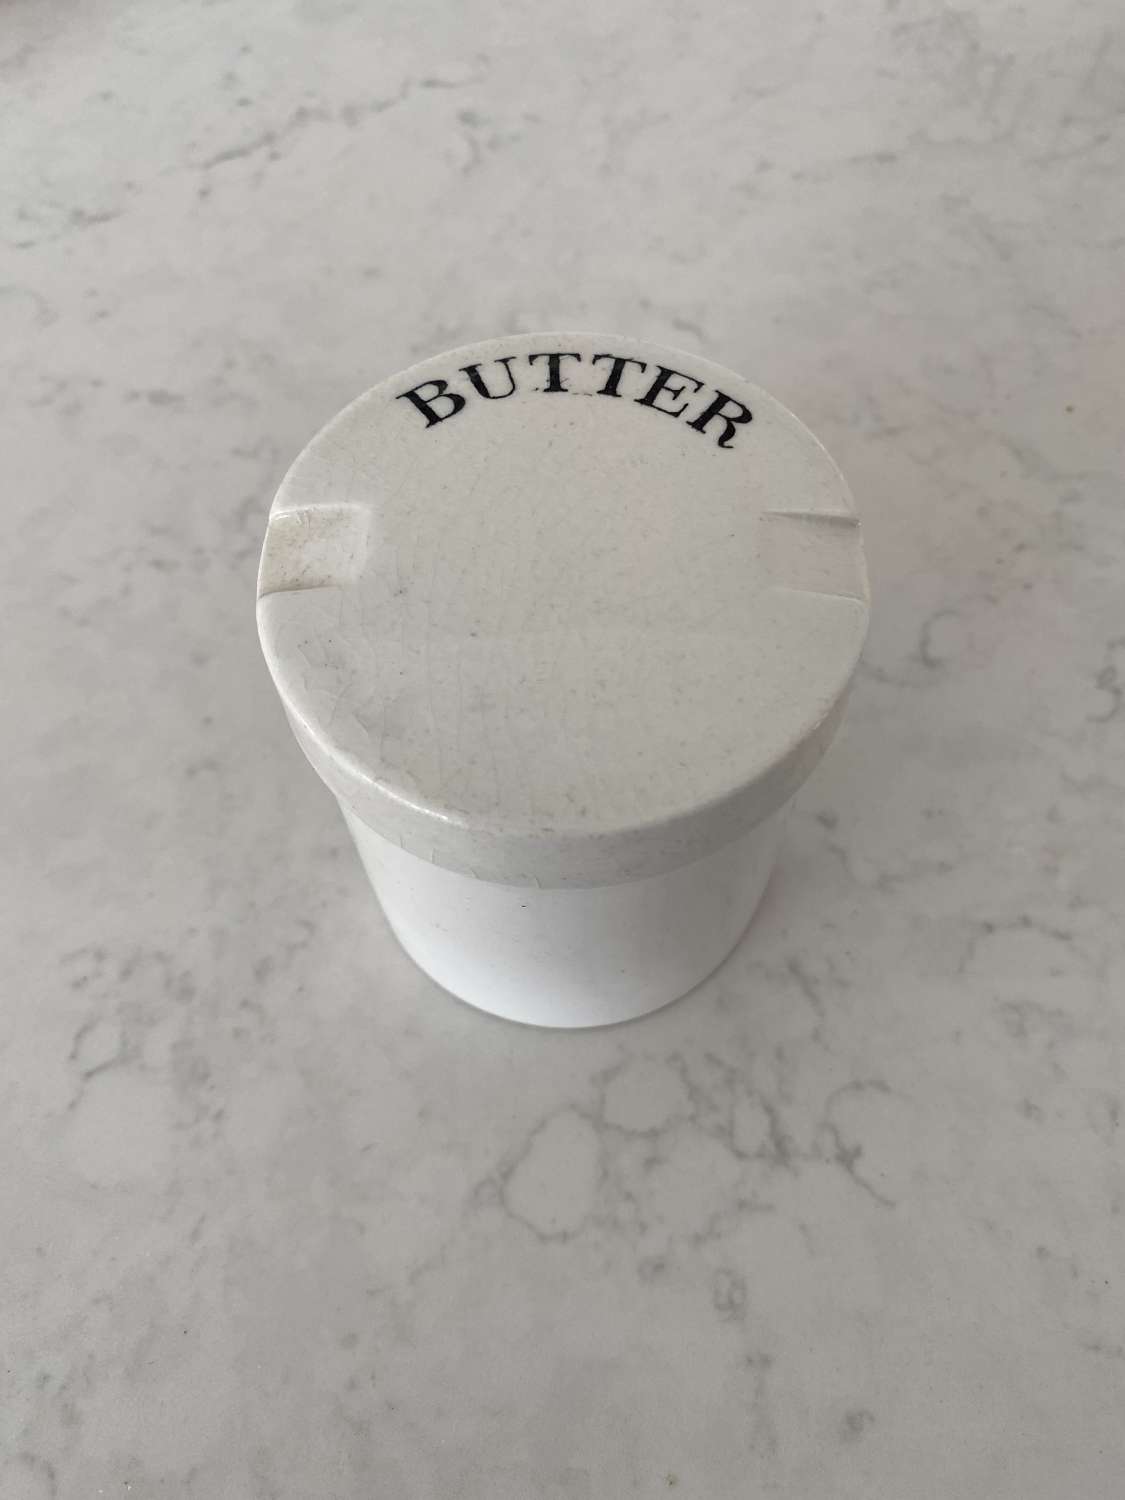 Edwardian White Ironstone Butter Pot - Excellent Condition